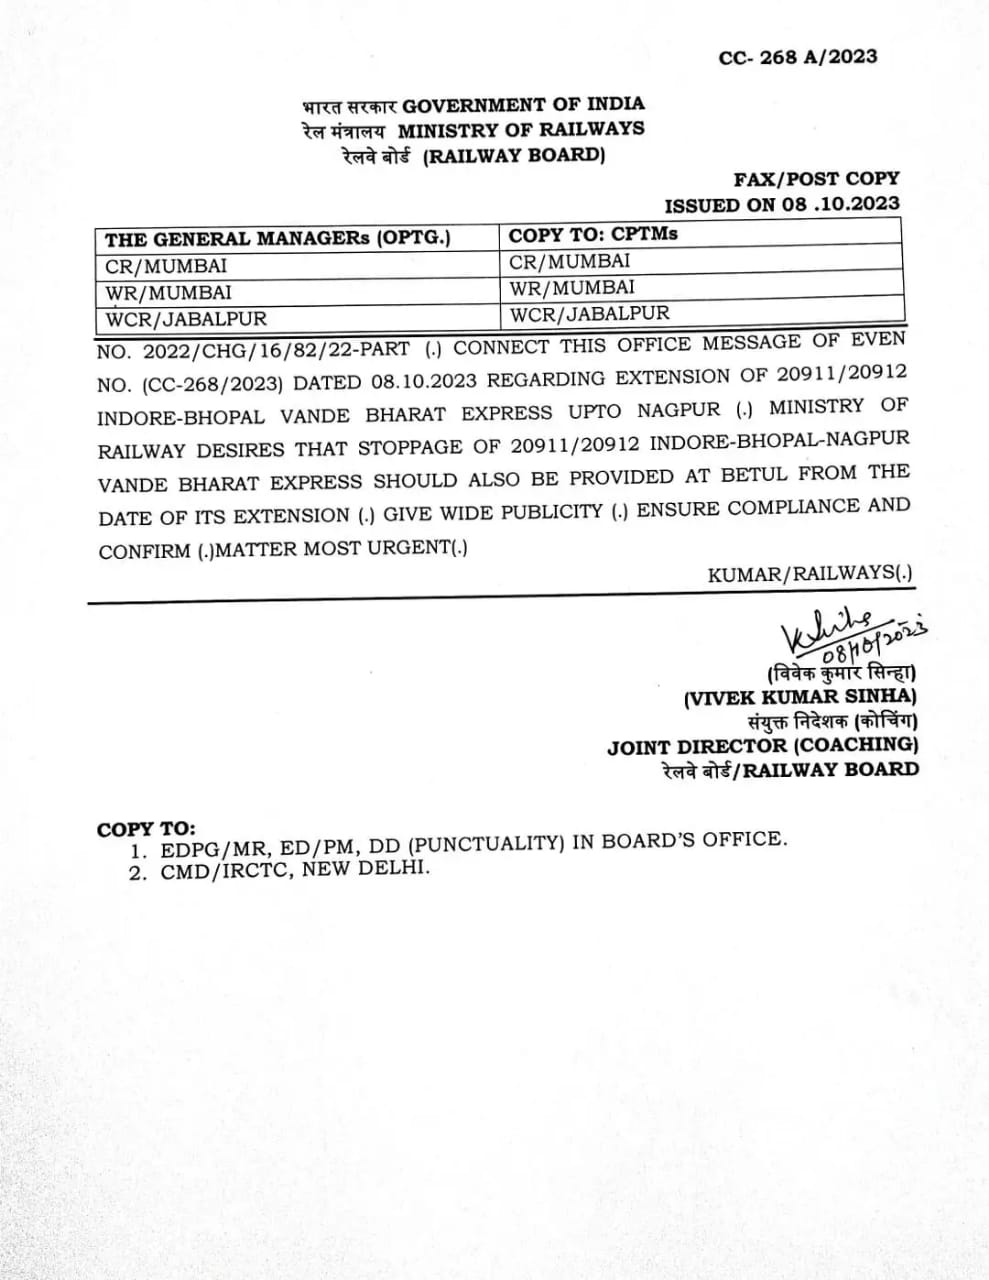 Railway issued order